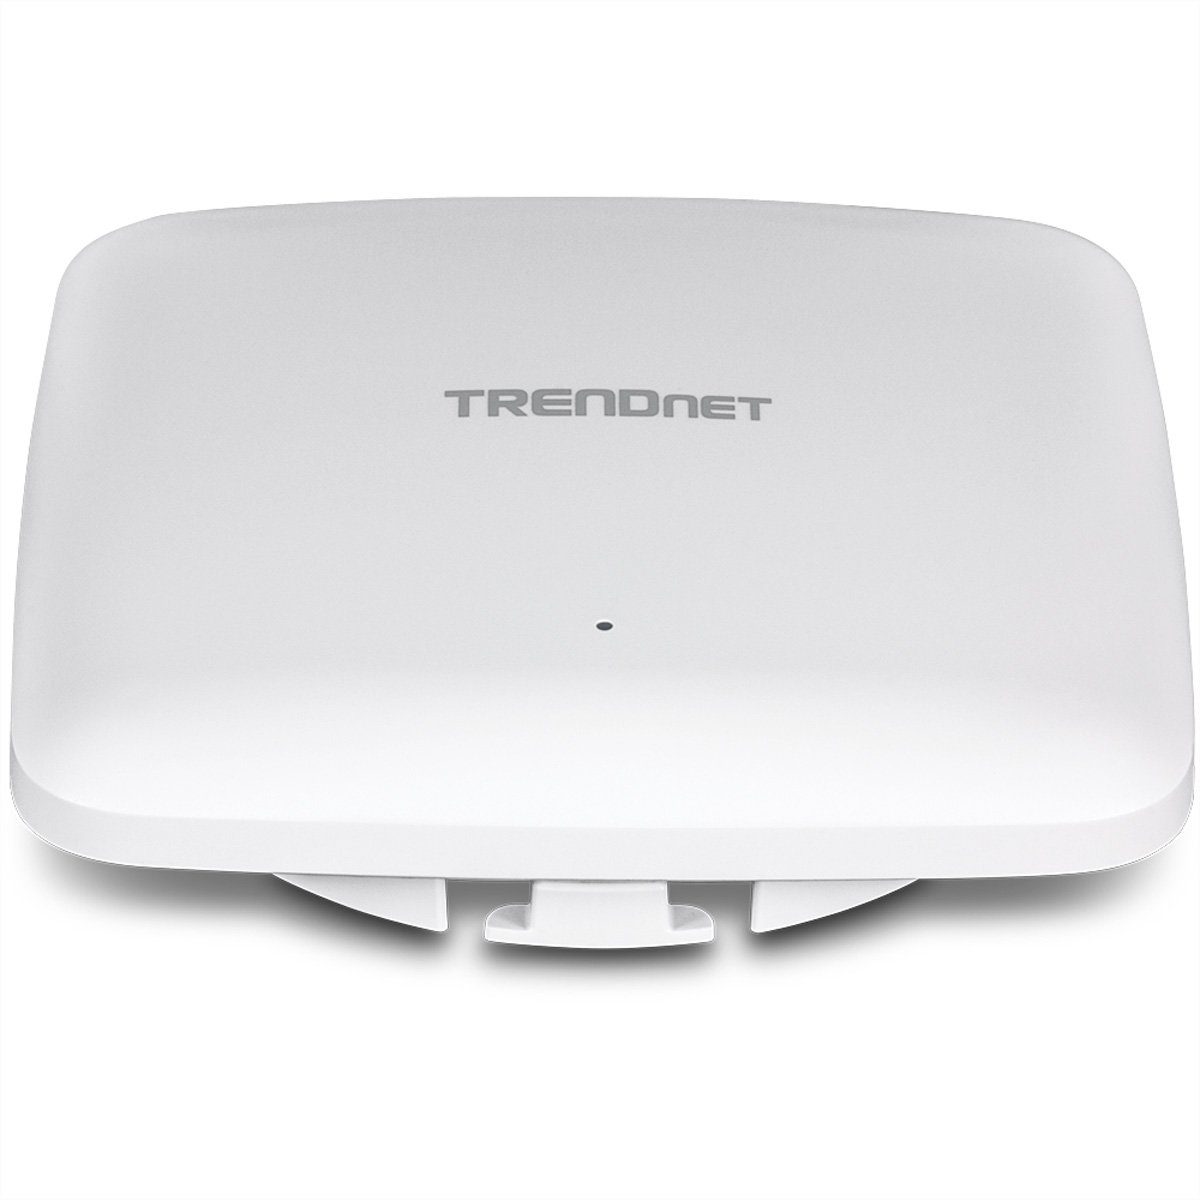 Trendnet TEW-921DAP Access Point WLAN-Repeater, AX1800 Wireless Dual Band PoE+